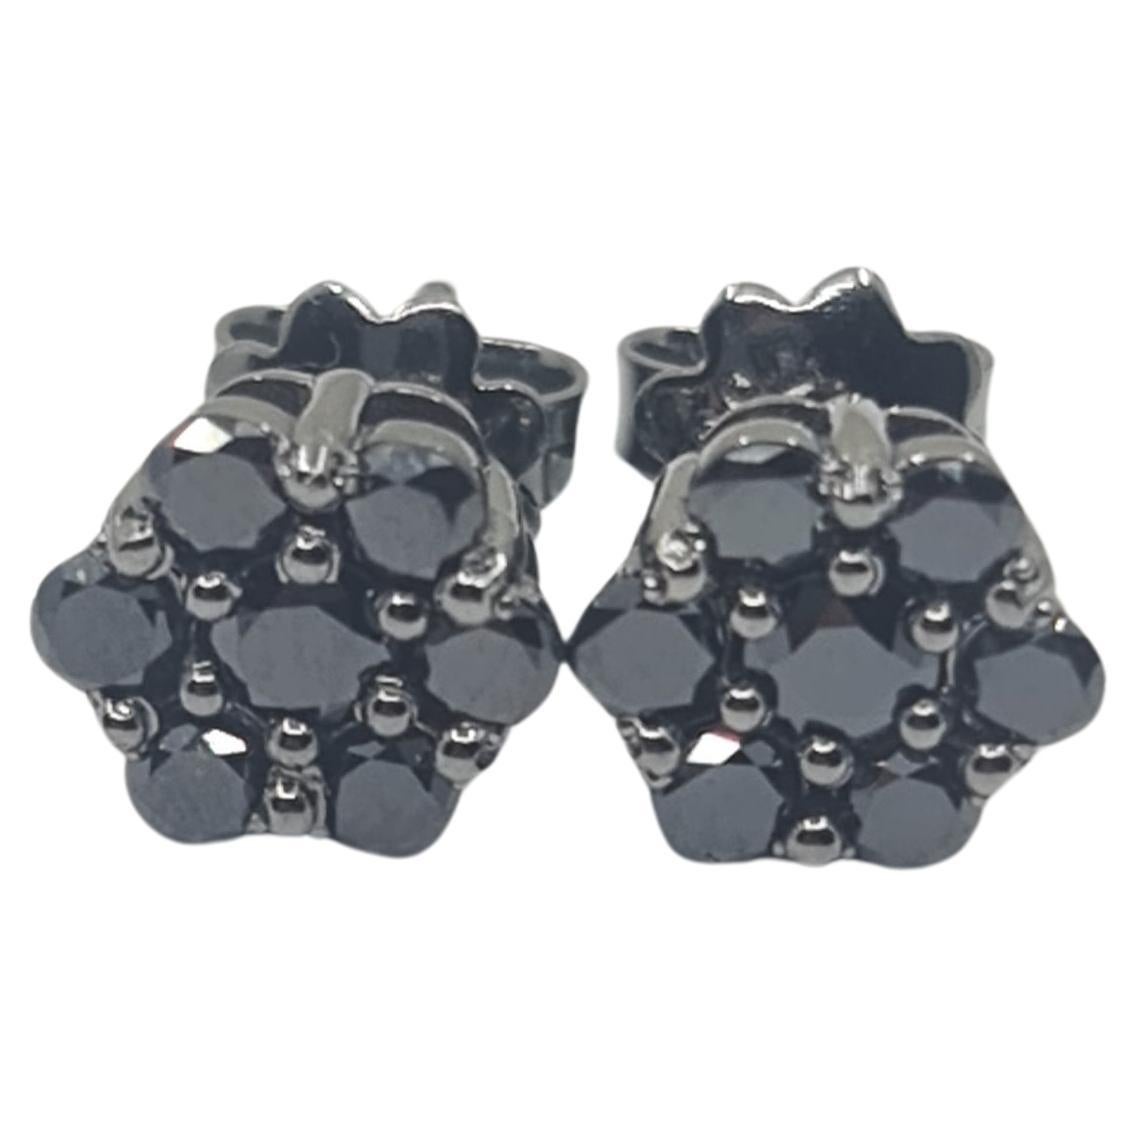 Exquisite Black Diamond Earrings 1.11 Carat in 18K Black Gold Round Cut For Sale